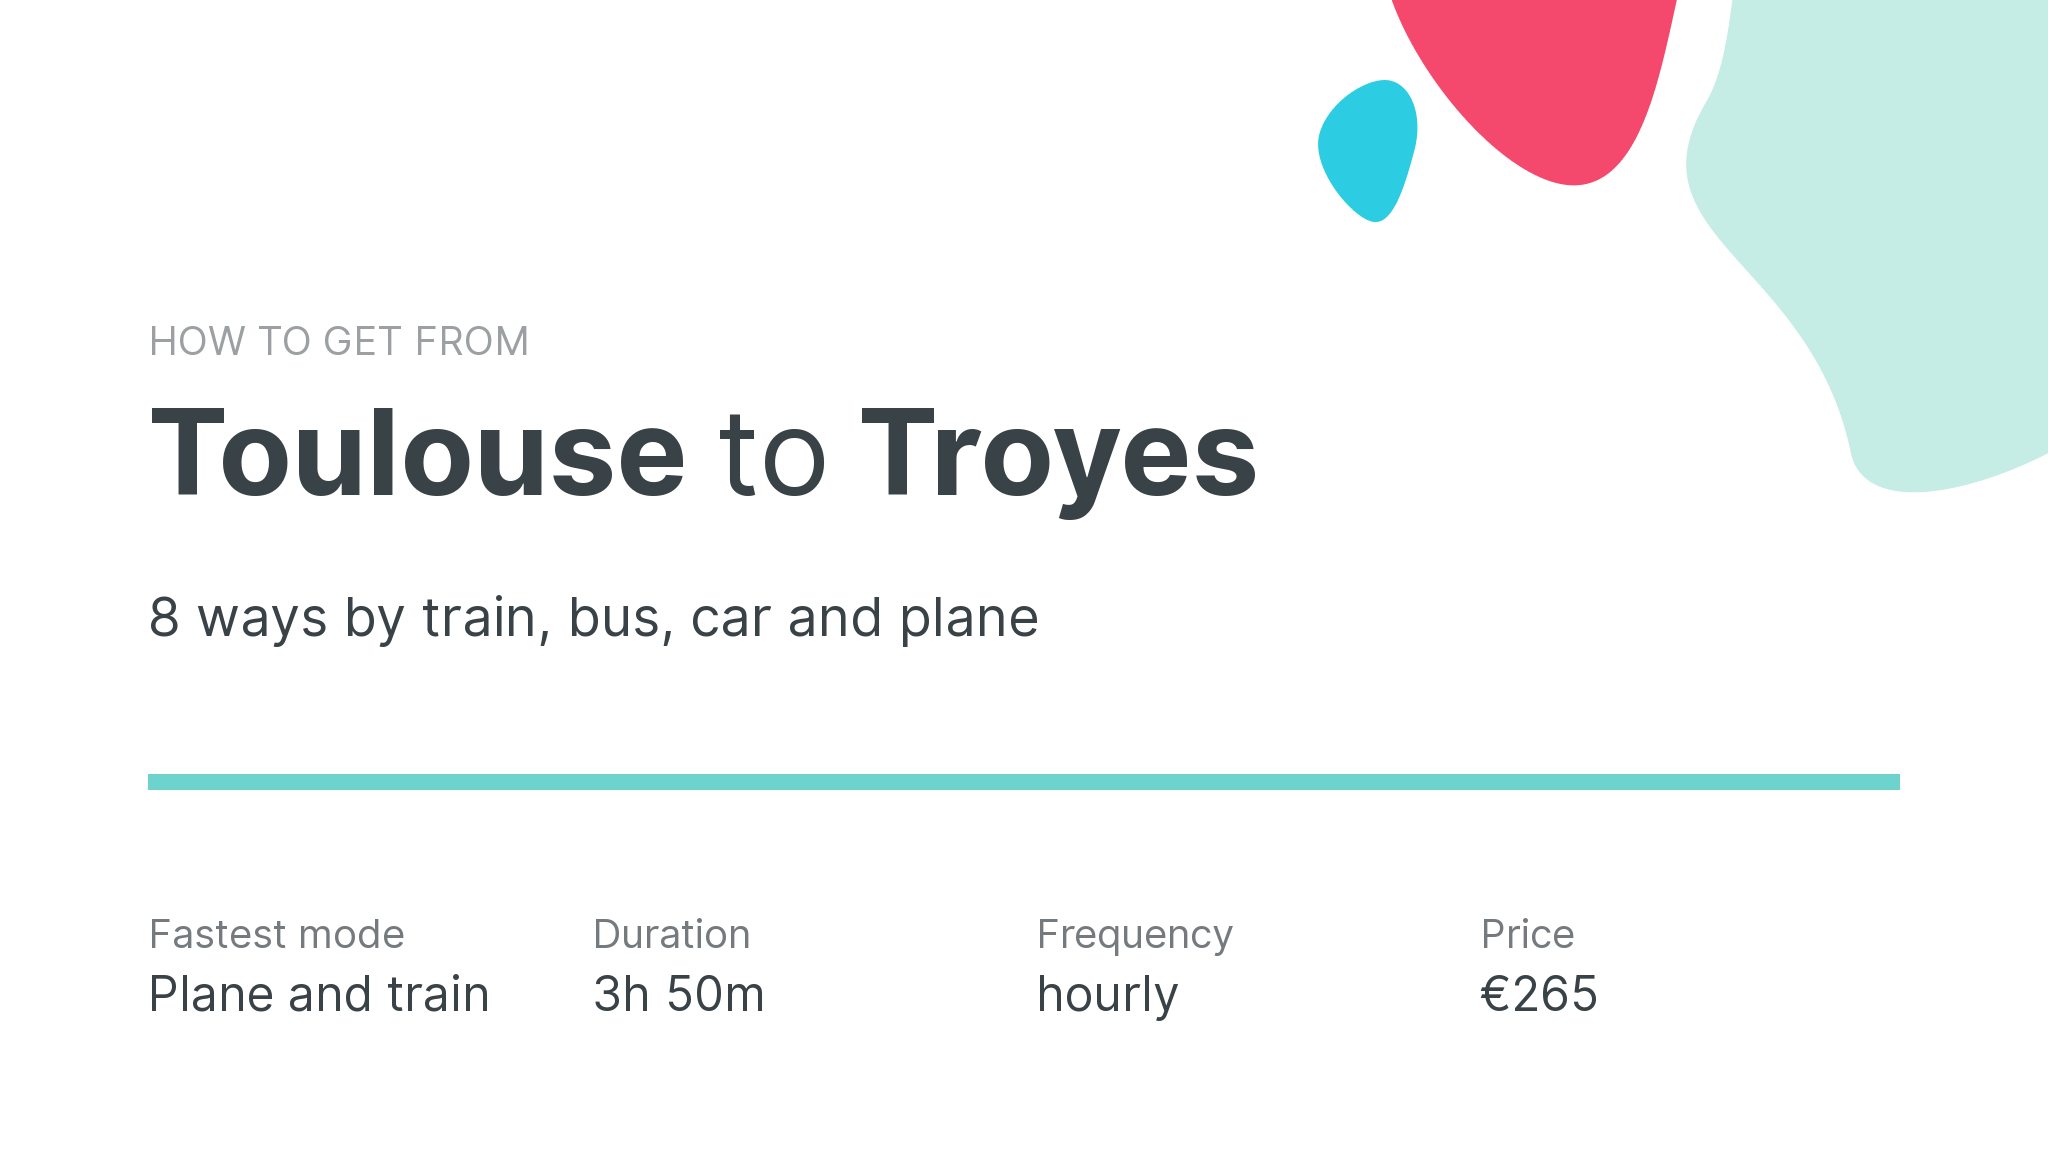 How do I get from Toulouse to Troyes